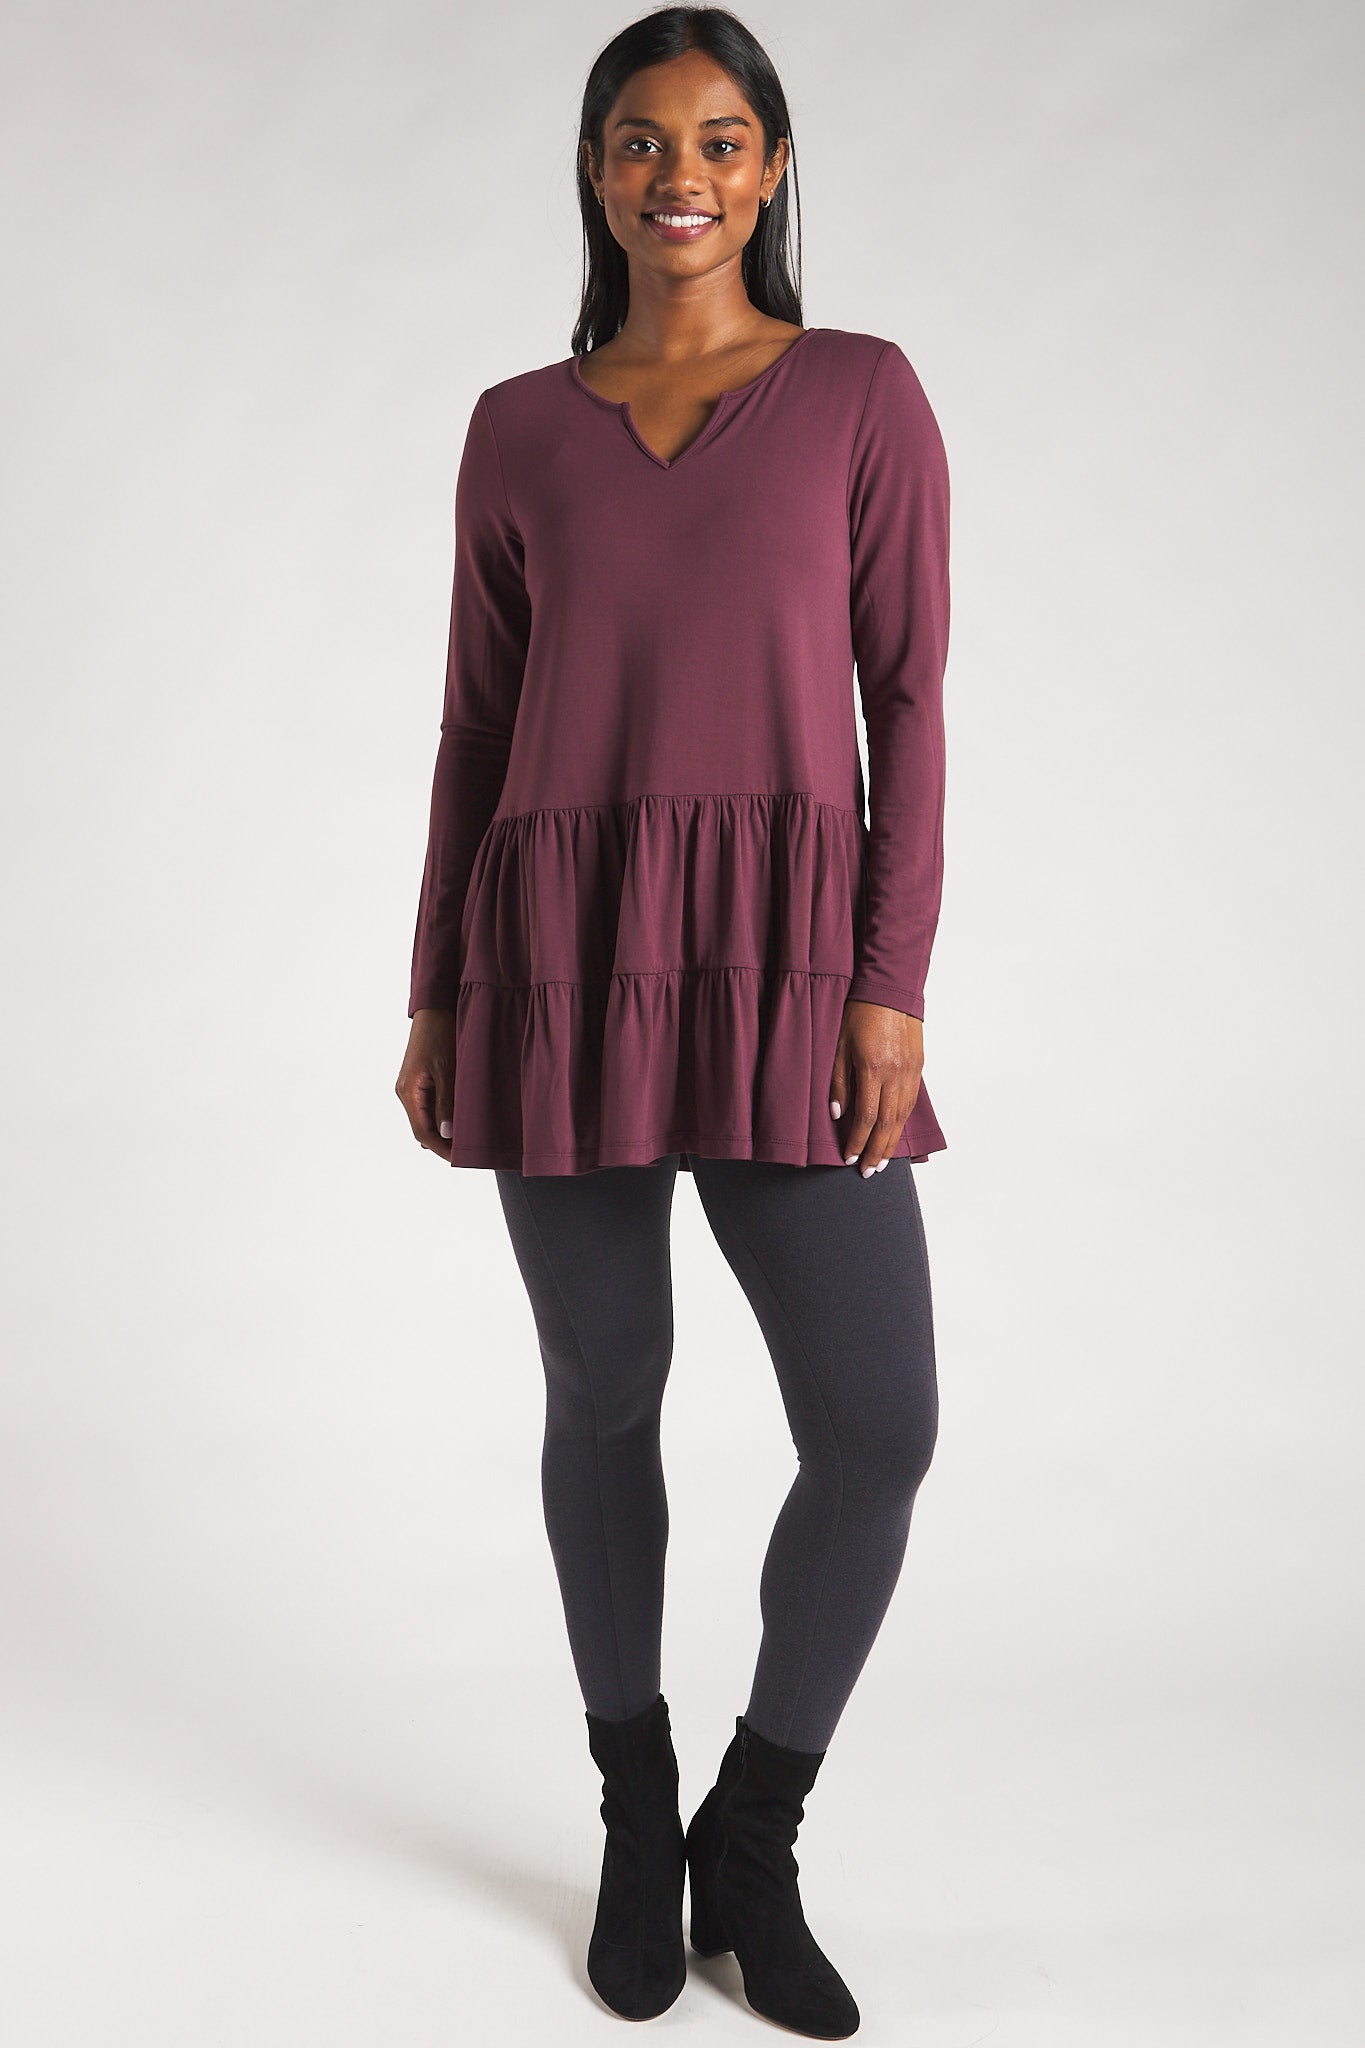 Women's bamboo leggings with pockets styled with tiered tunic long sleeve top.